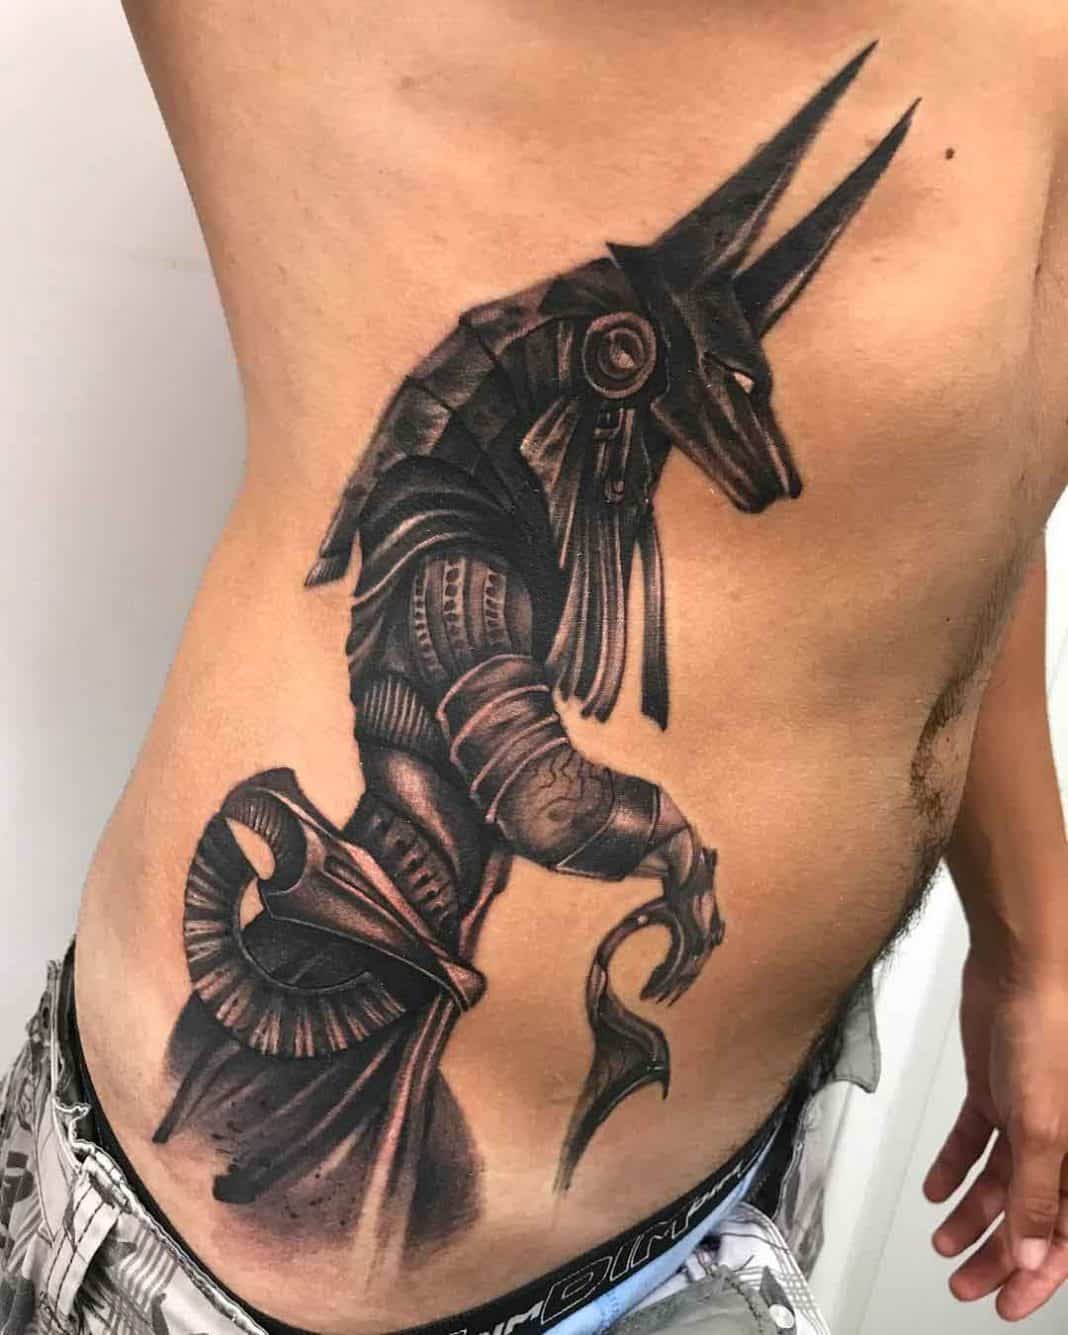 75 Amazing Anubis Tattoo Ideas - Inspiration and Meanings